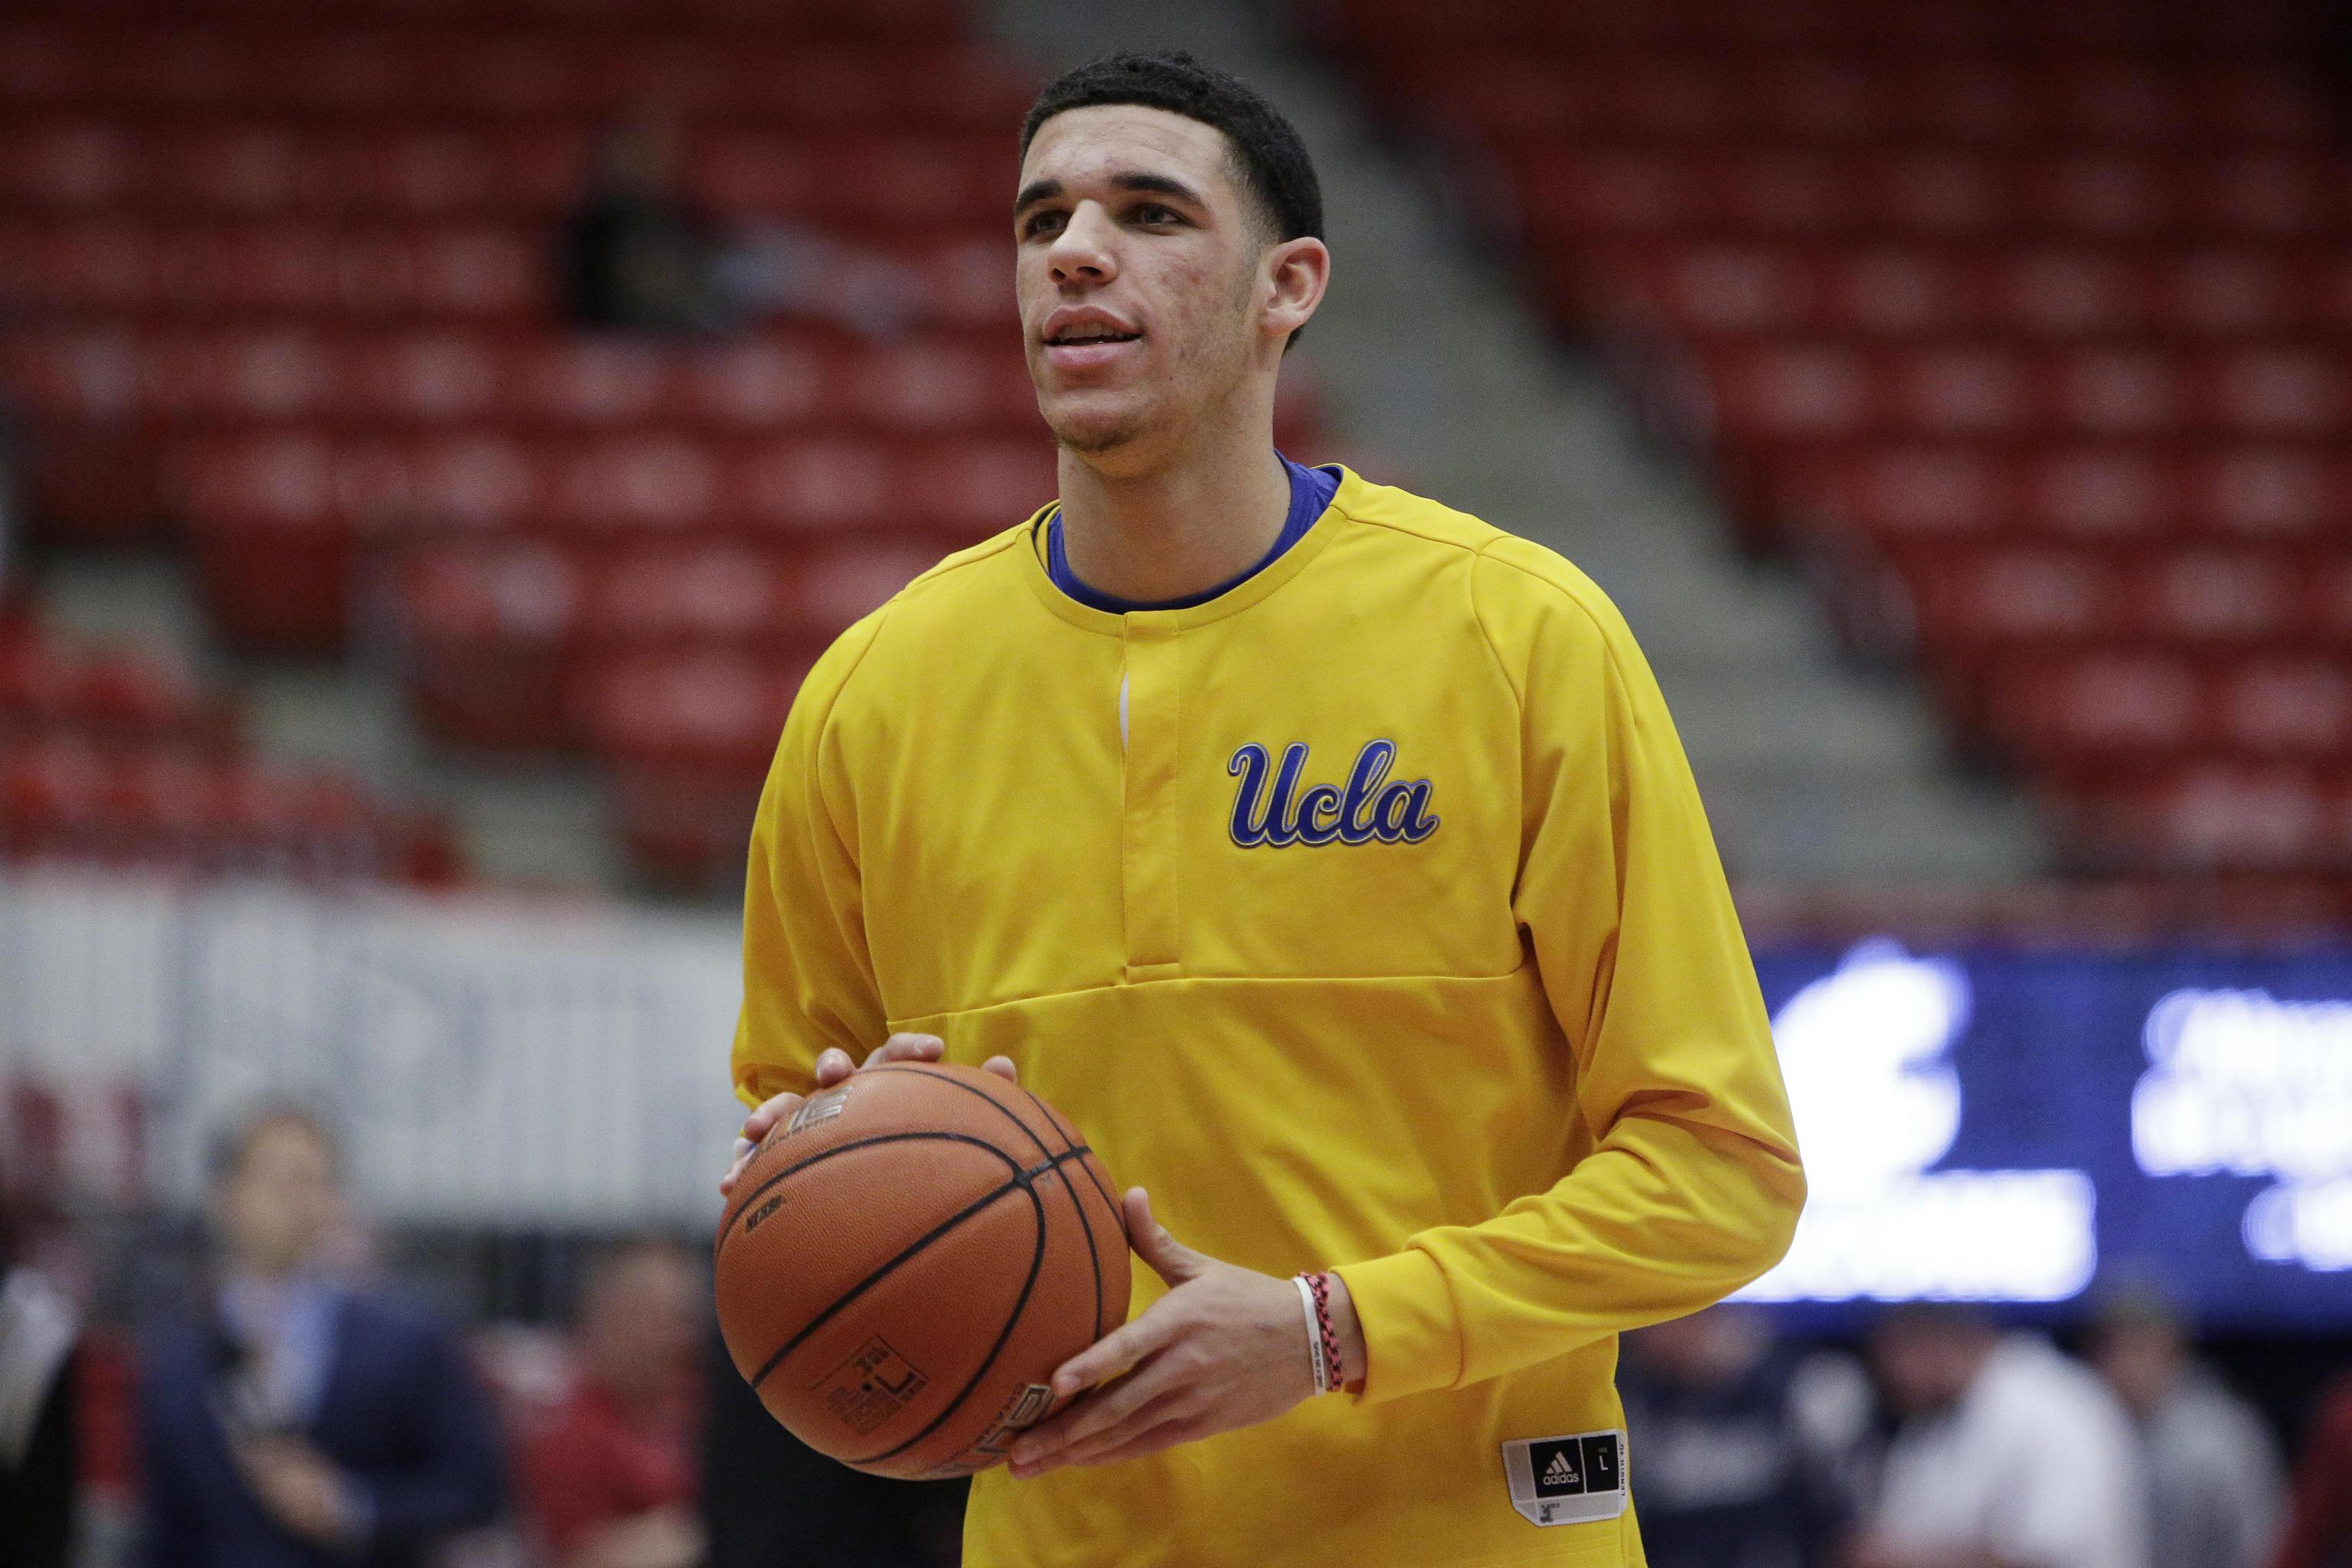 Nike, Under Armour, Adidas no interested in deal with Lonzo Ball